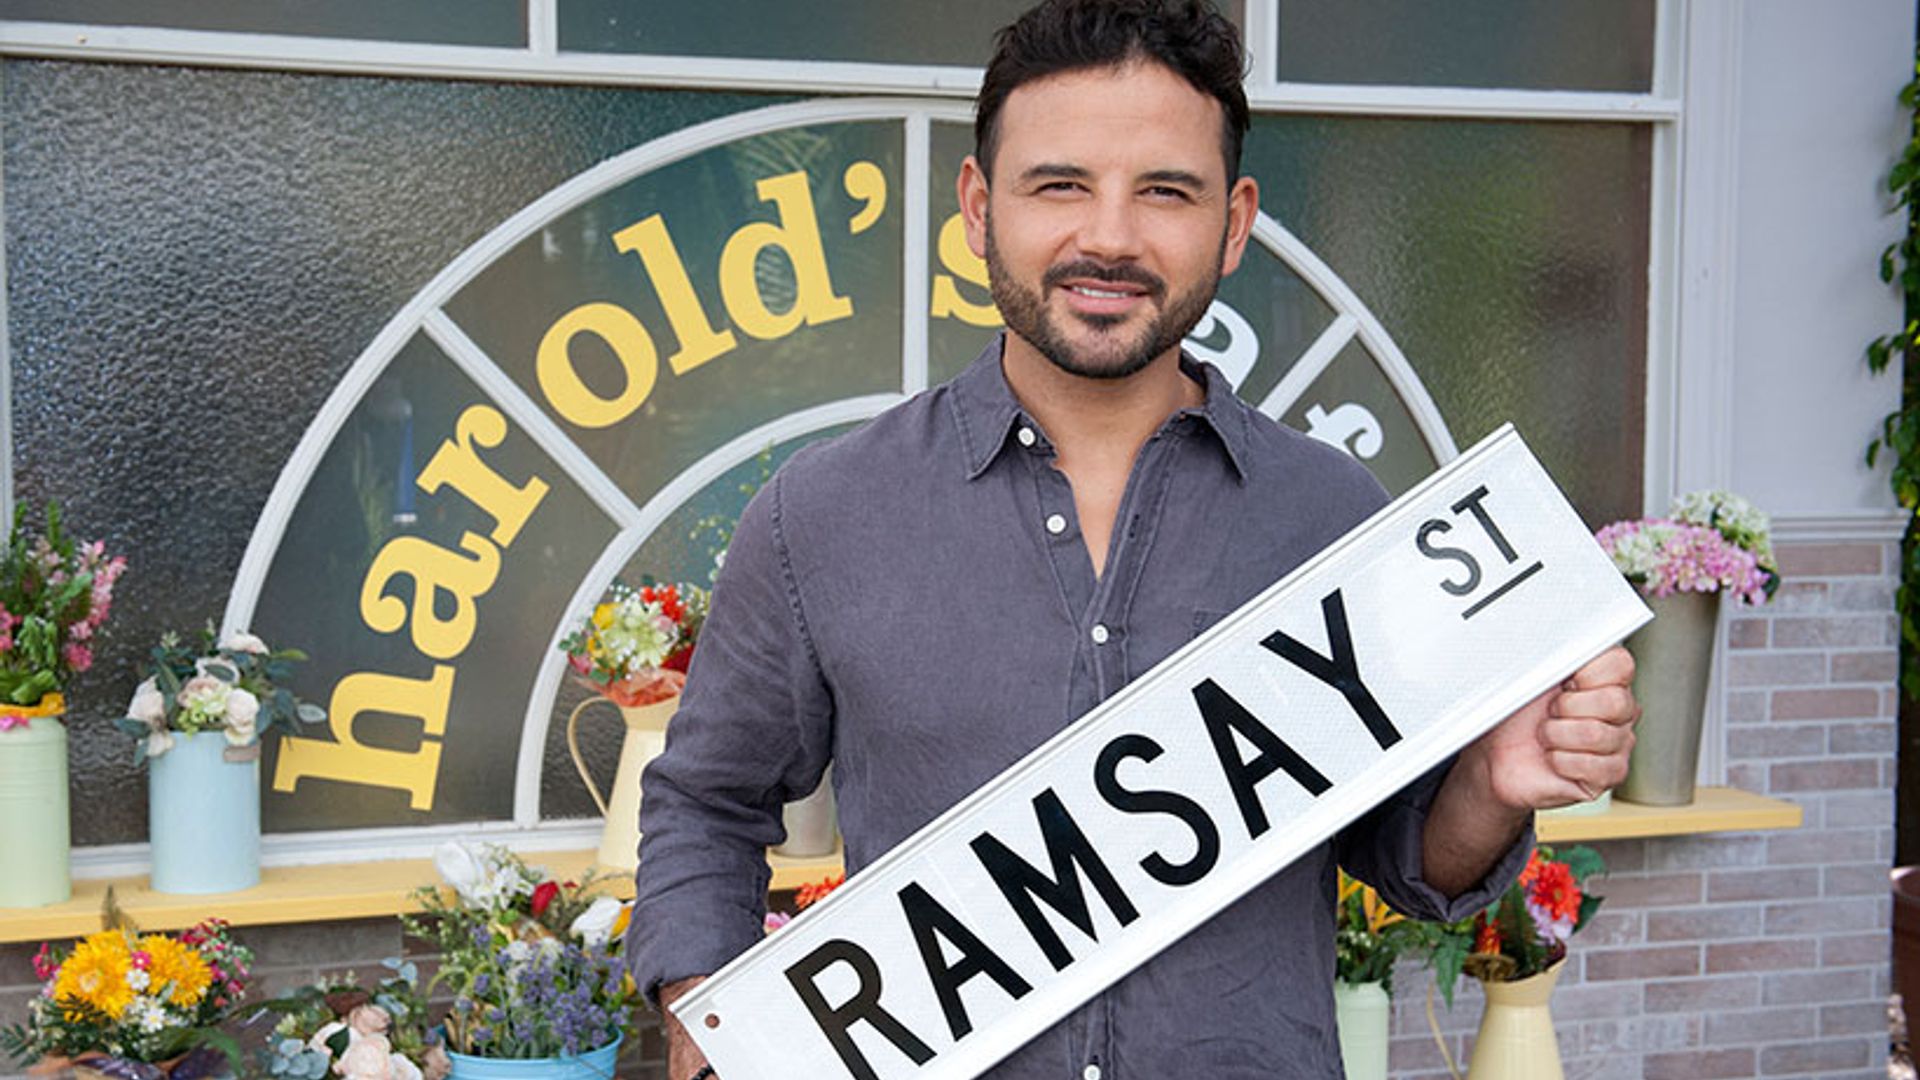 Coronation Street star Ryan Thomas has landed a role in Neighbours - find out all the details